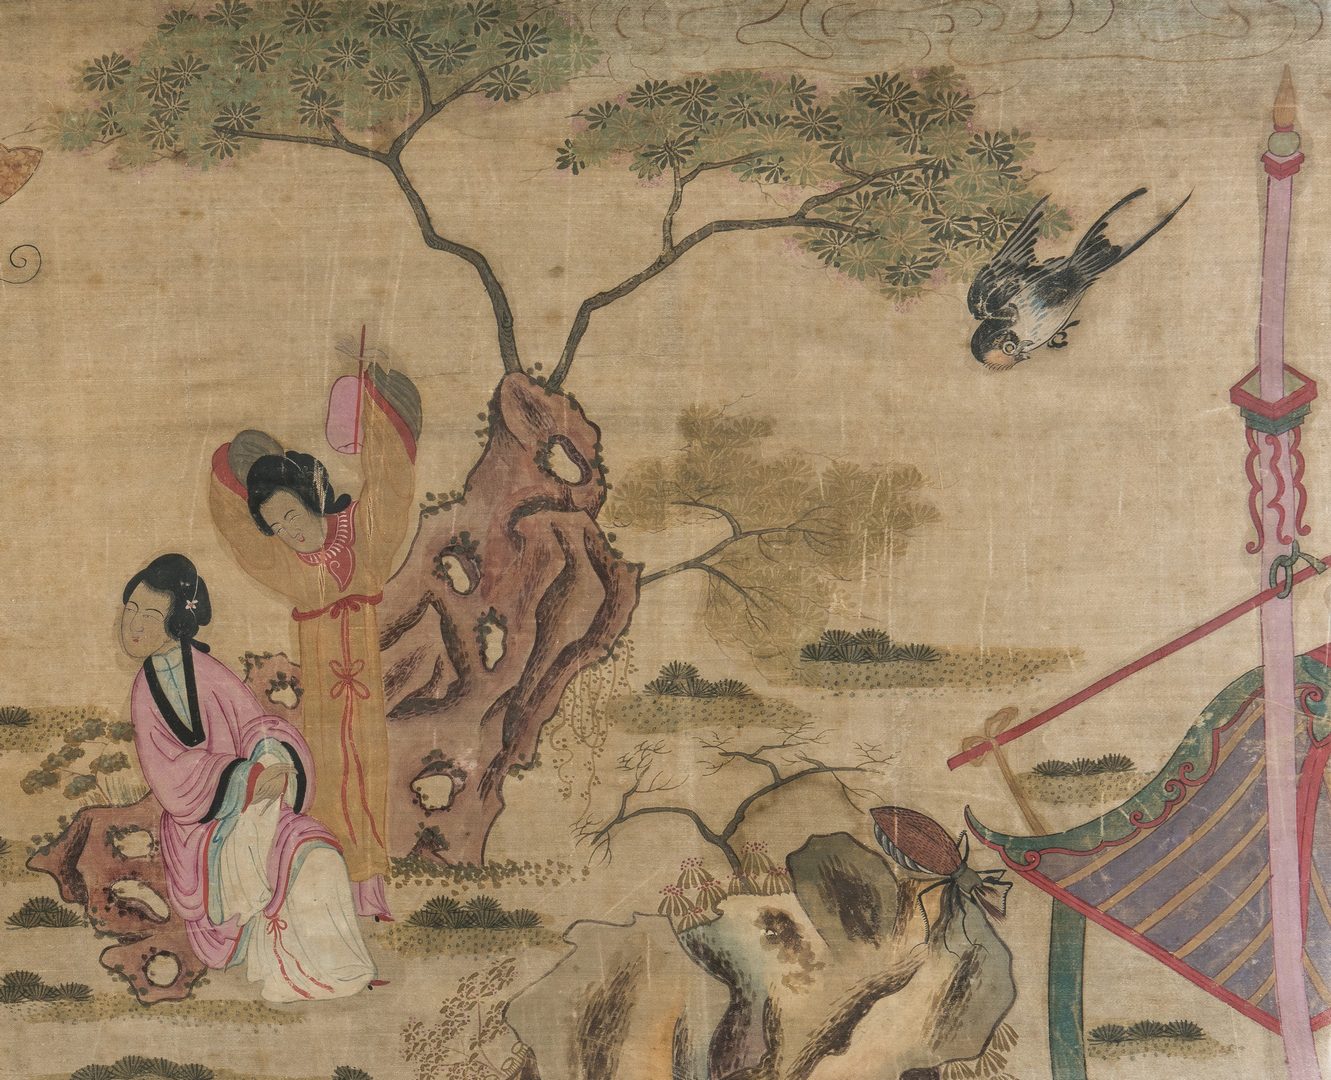 Lot 3: Panoramic Chinese Painting on Silk